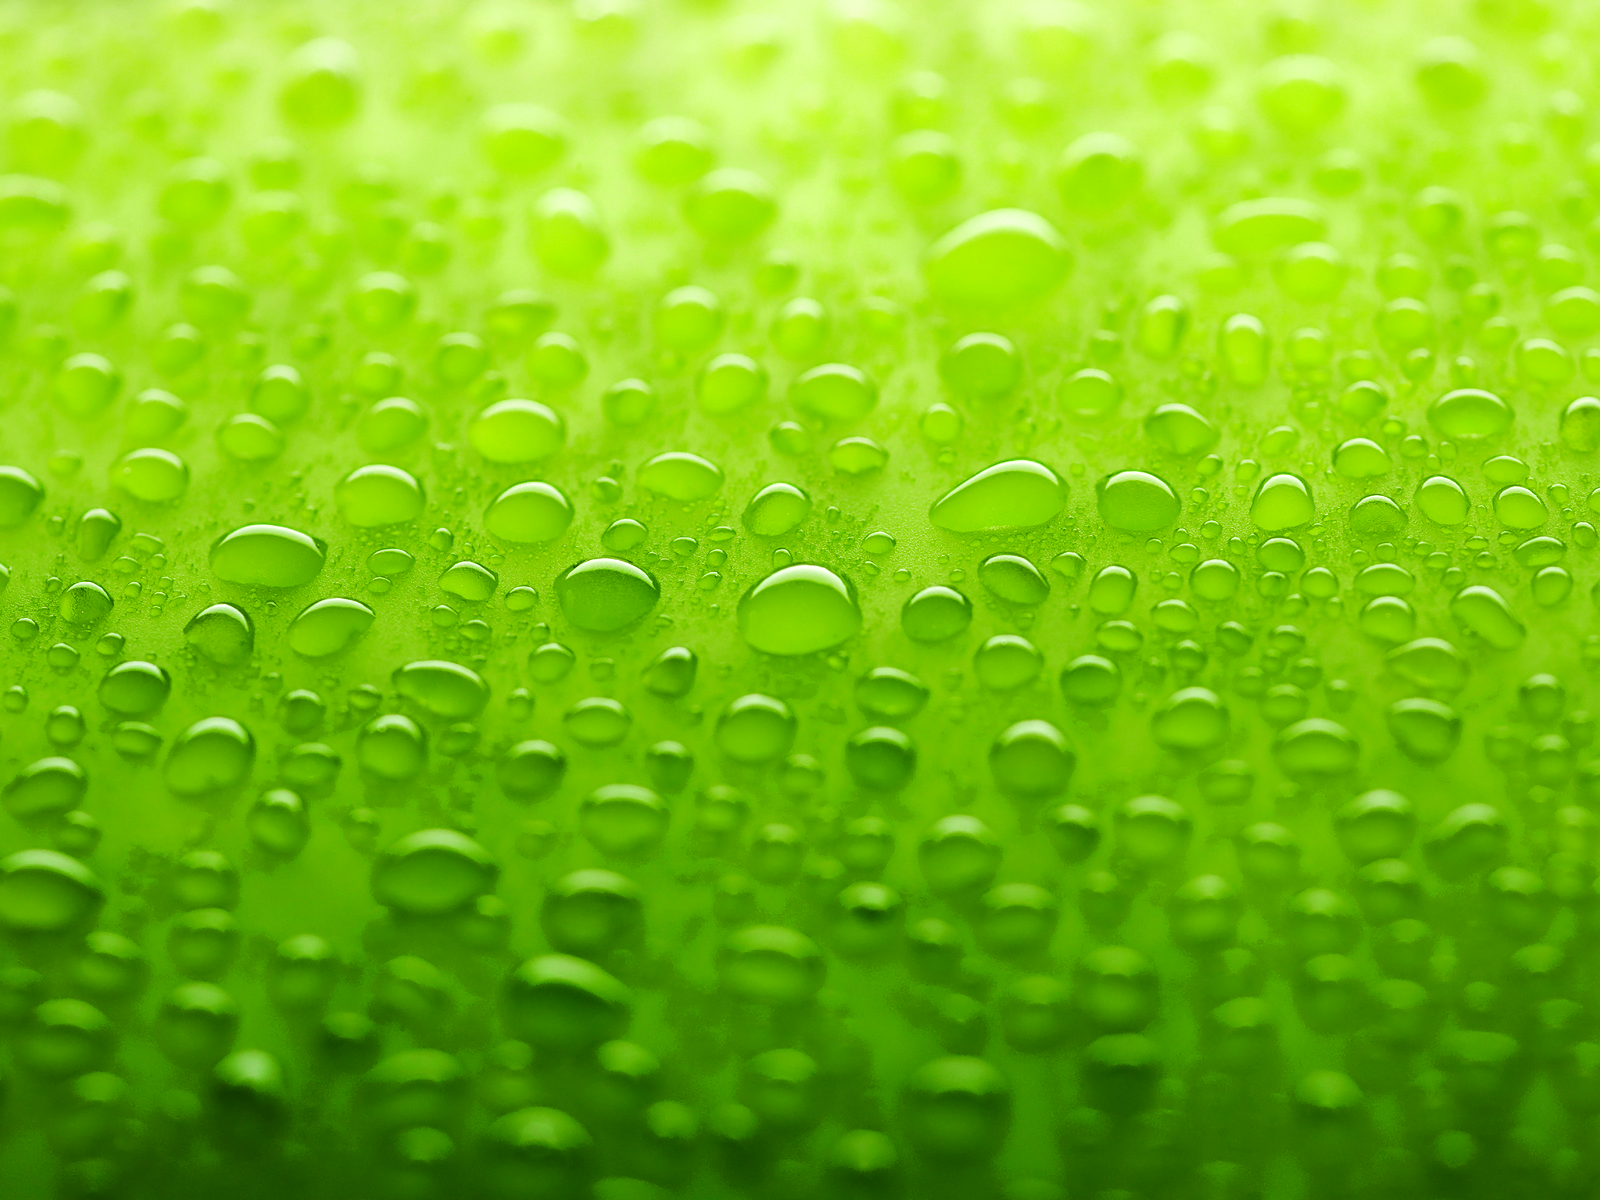 Green Water Droplets On A Glass Surface